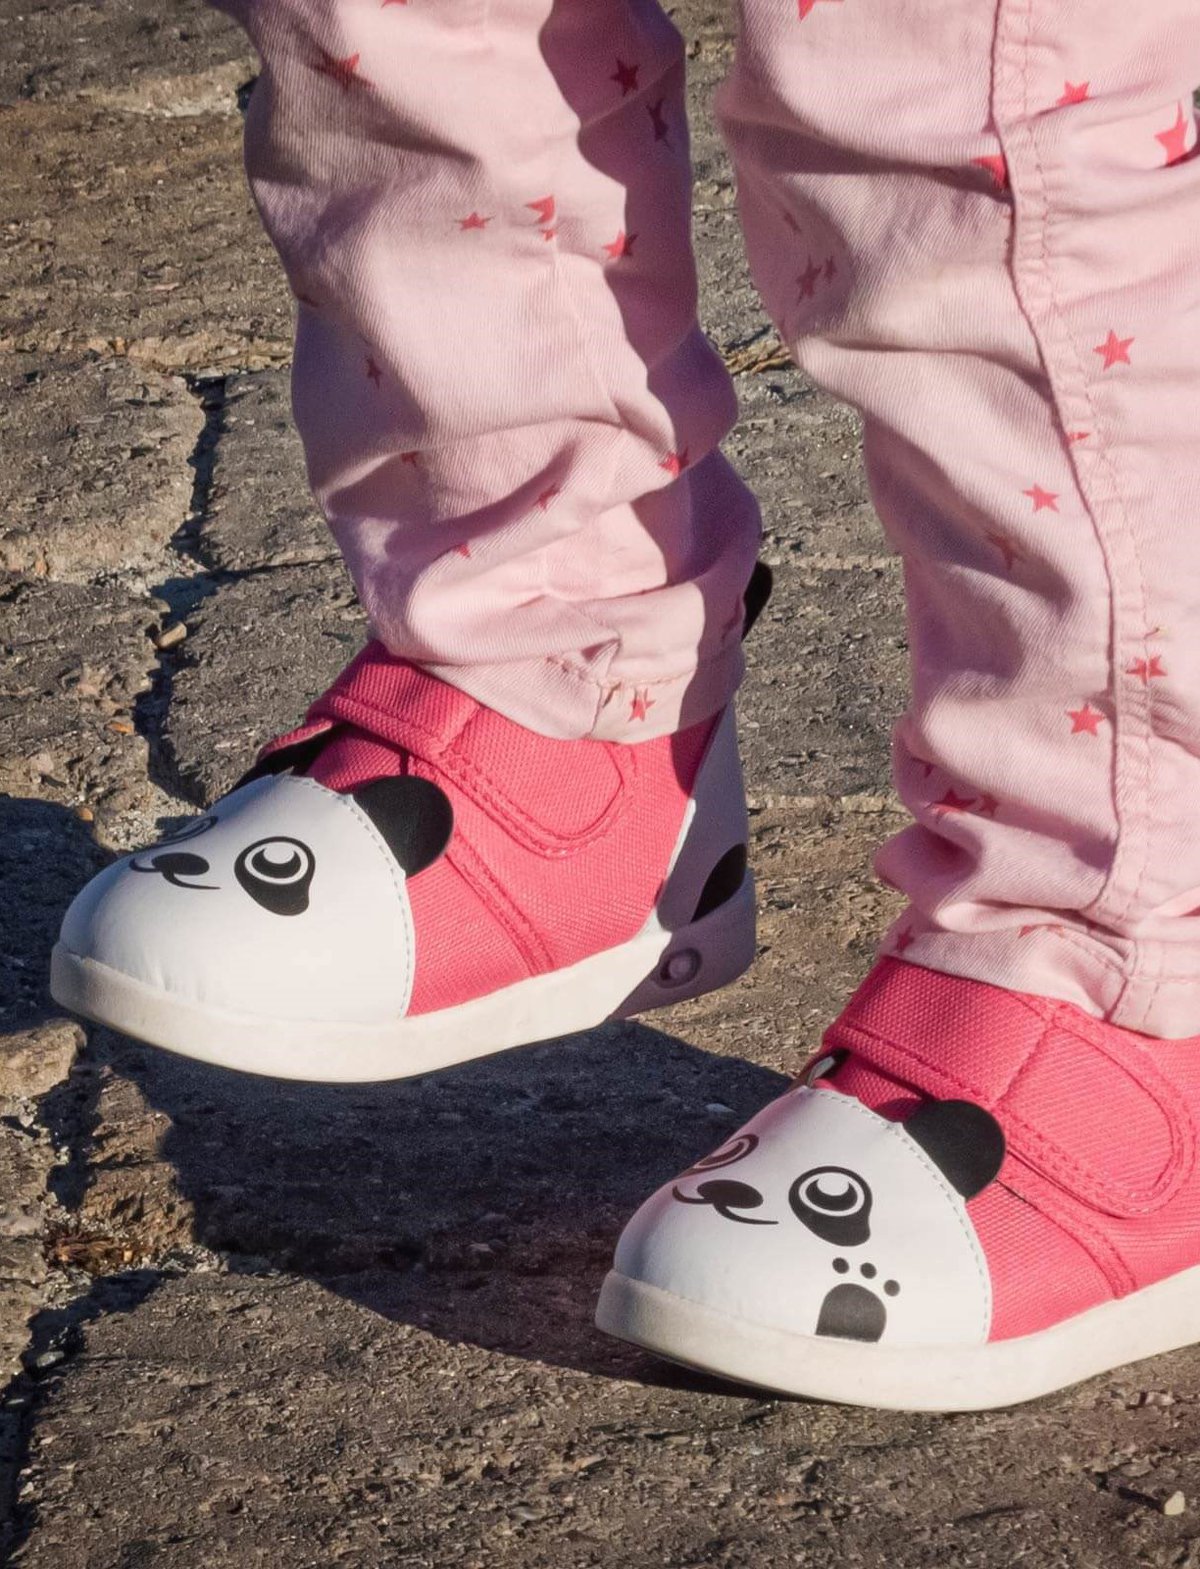 Ikiki Shoes: 2 Adorable Options For Toddlers